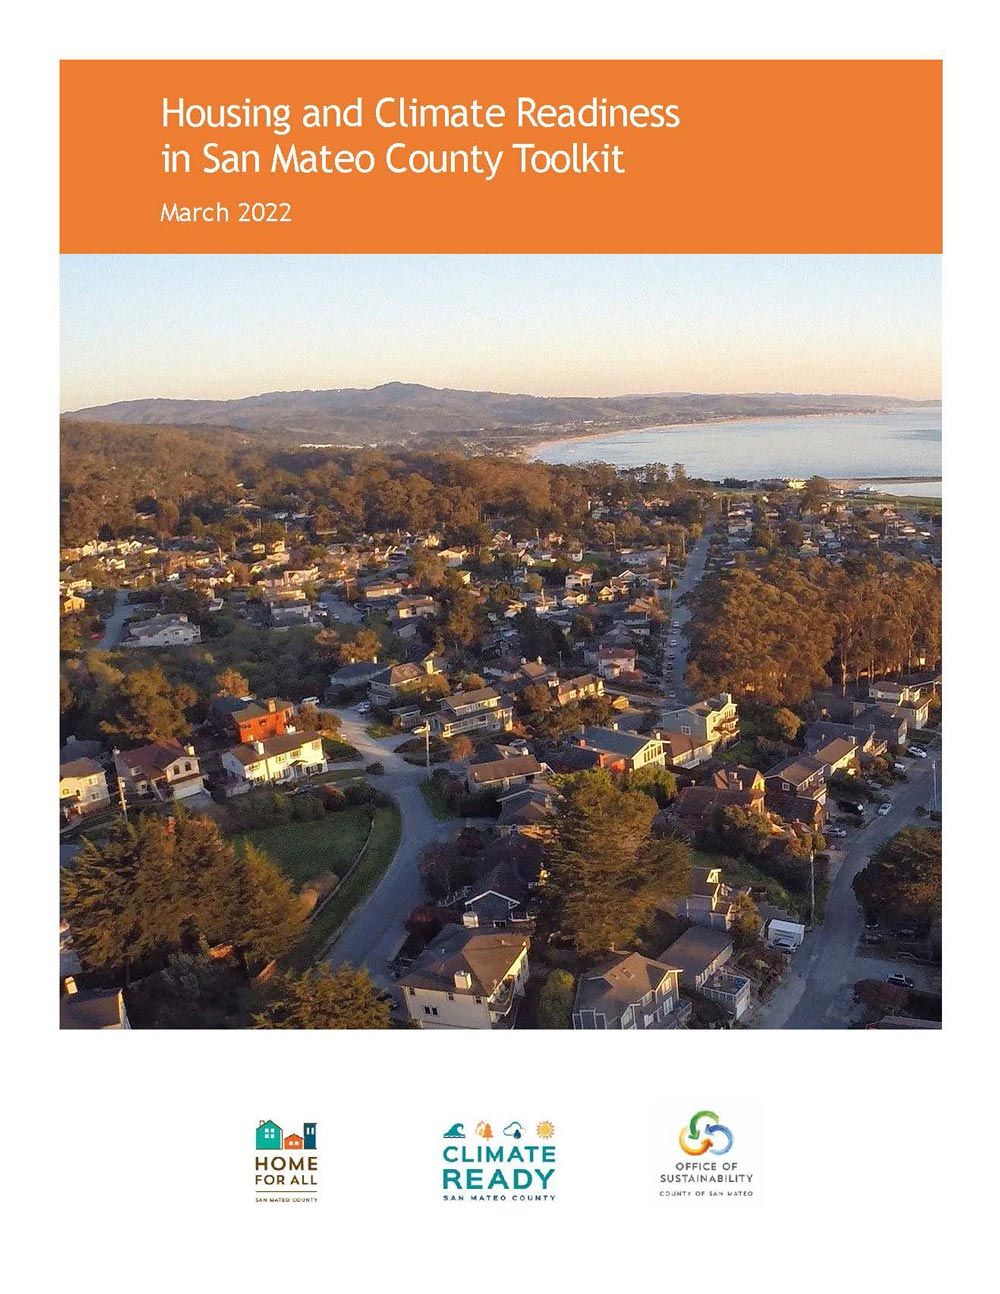 Housing and Climate Readiness in San Mateo County Toolkit